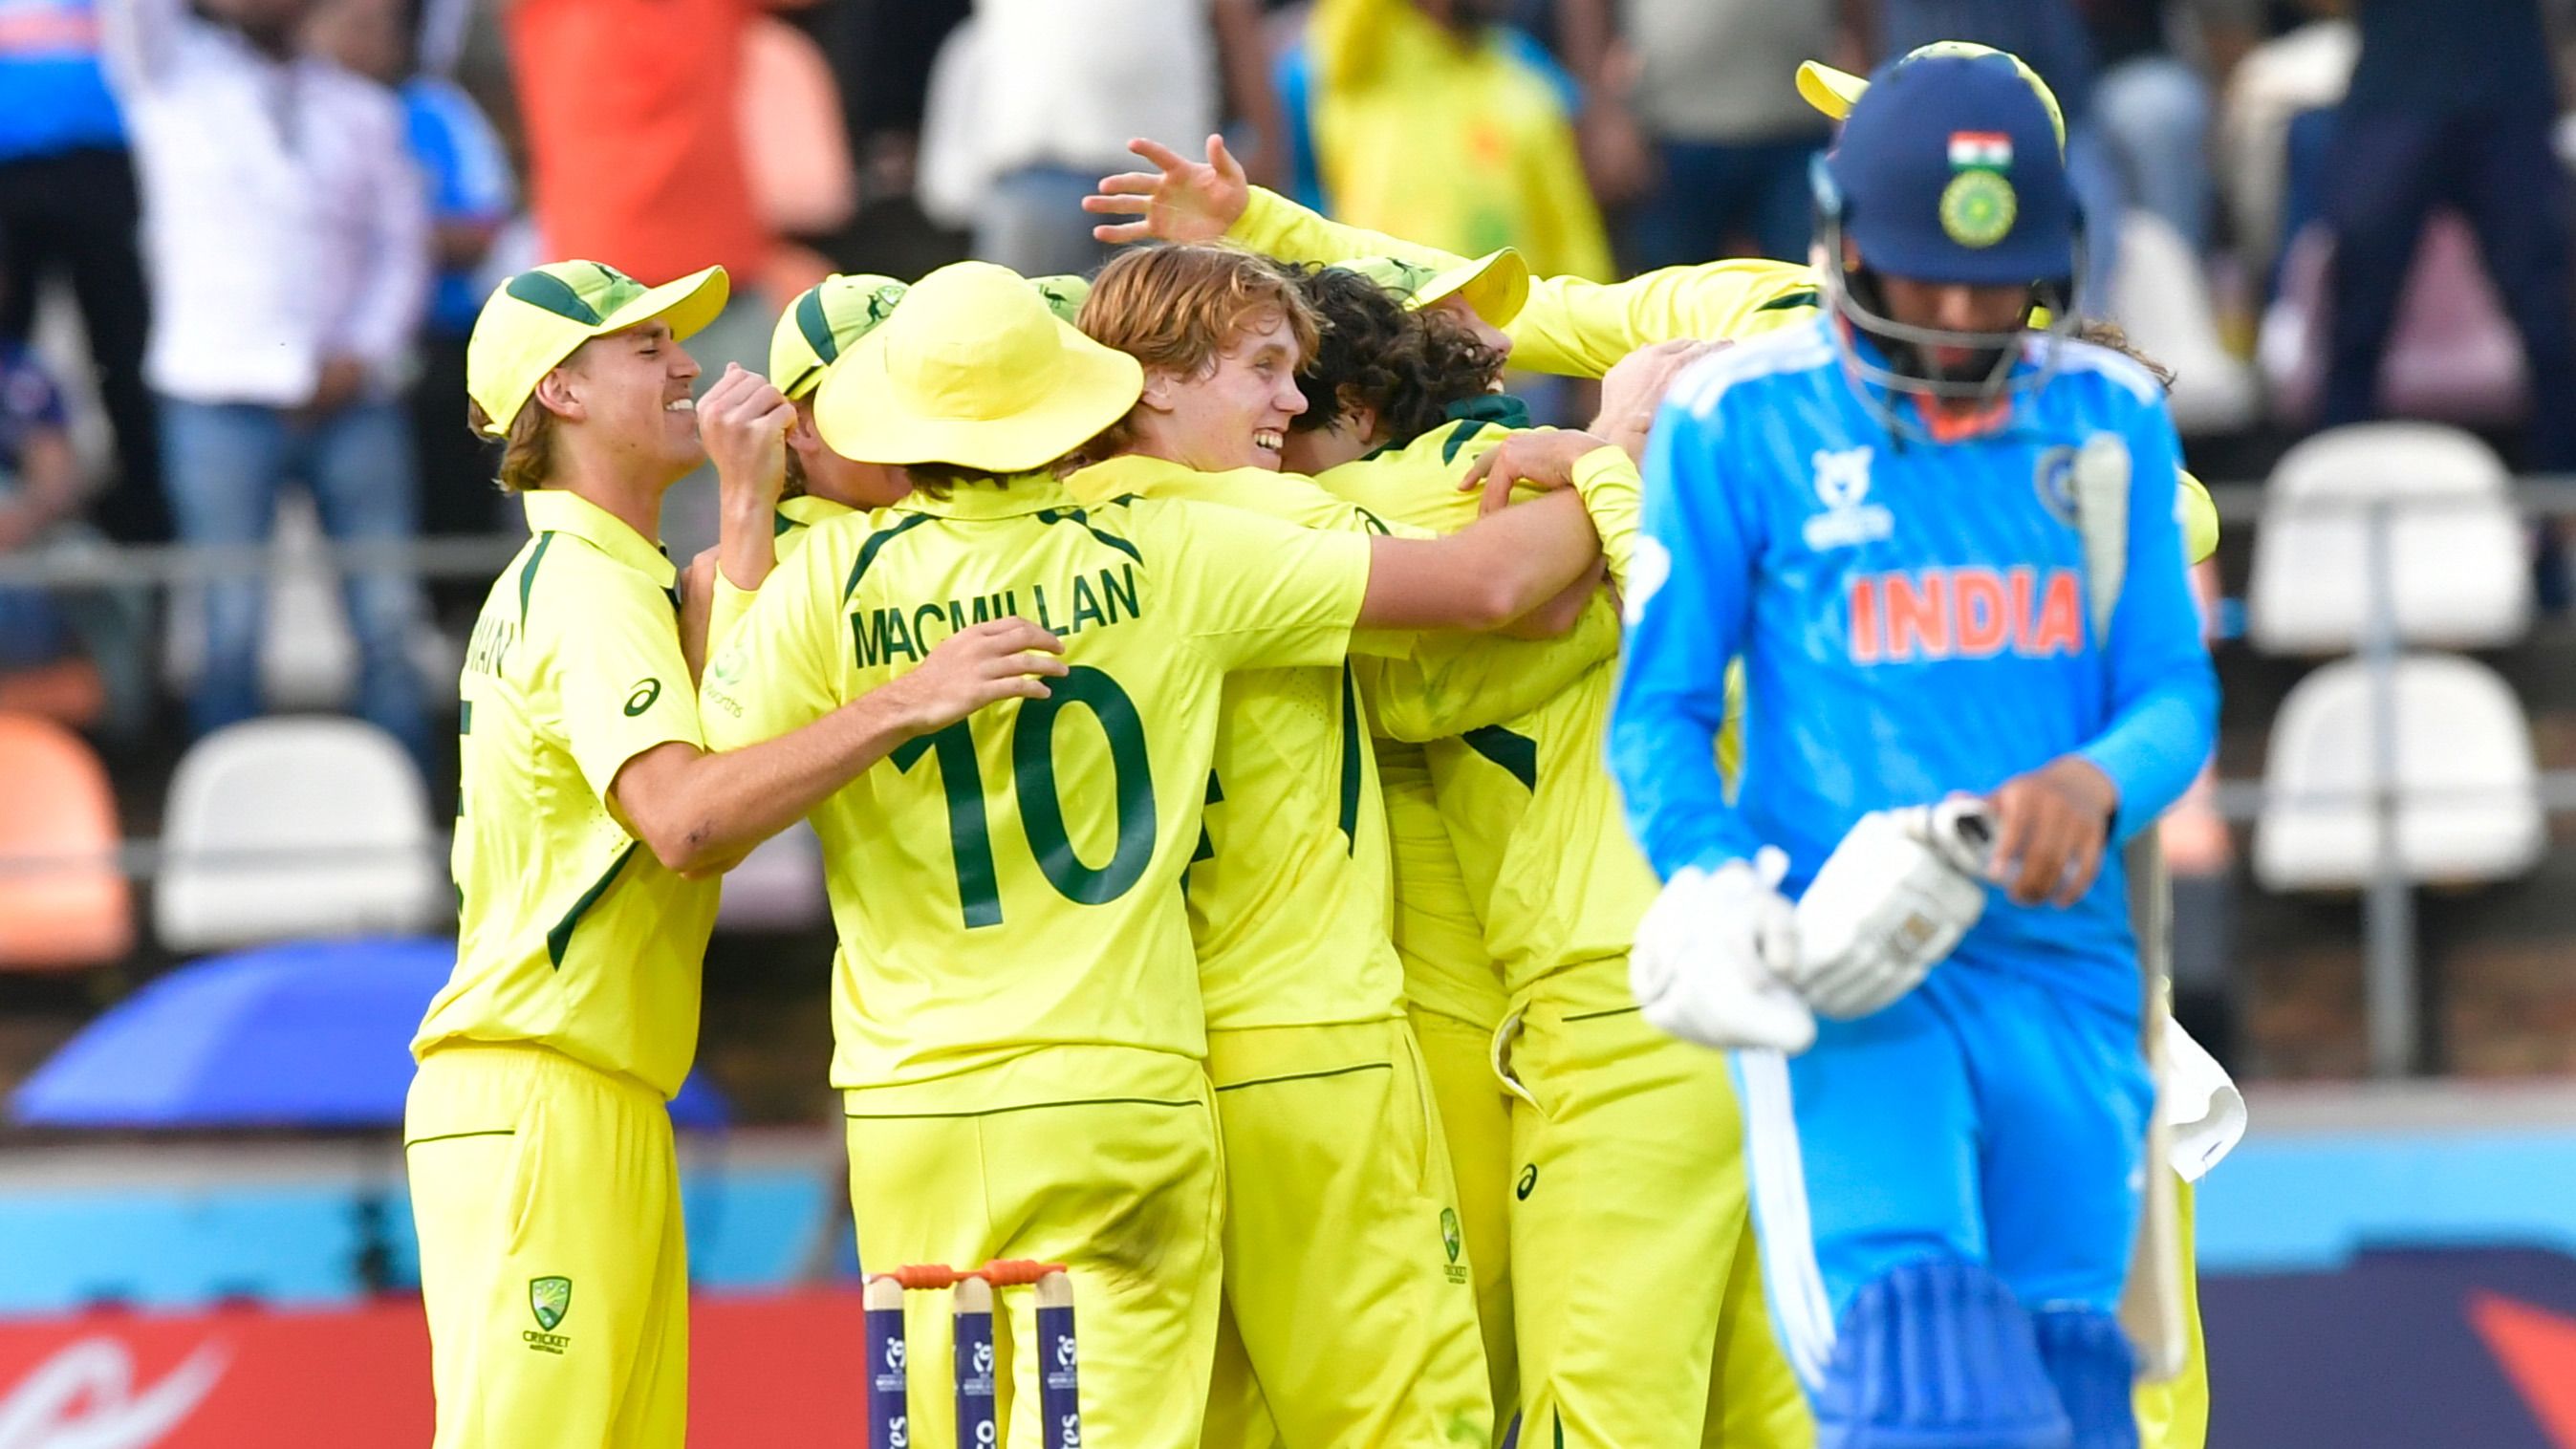 Clinical Aussies dominate India to win under 19s Cricket World Cup